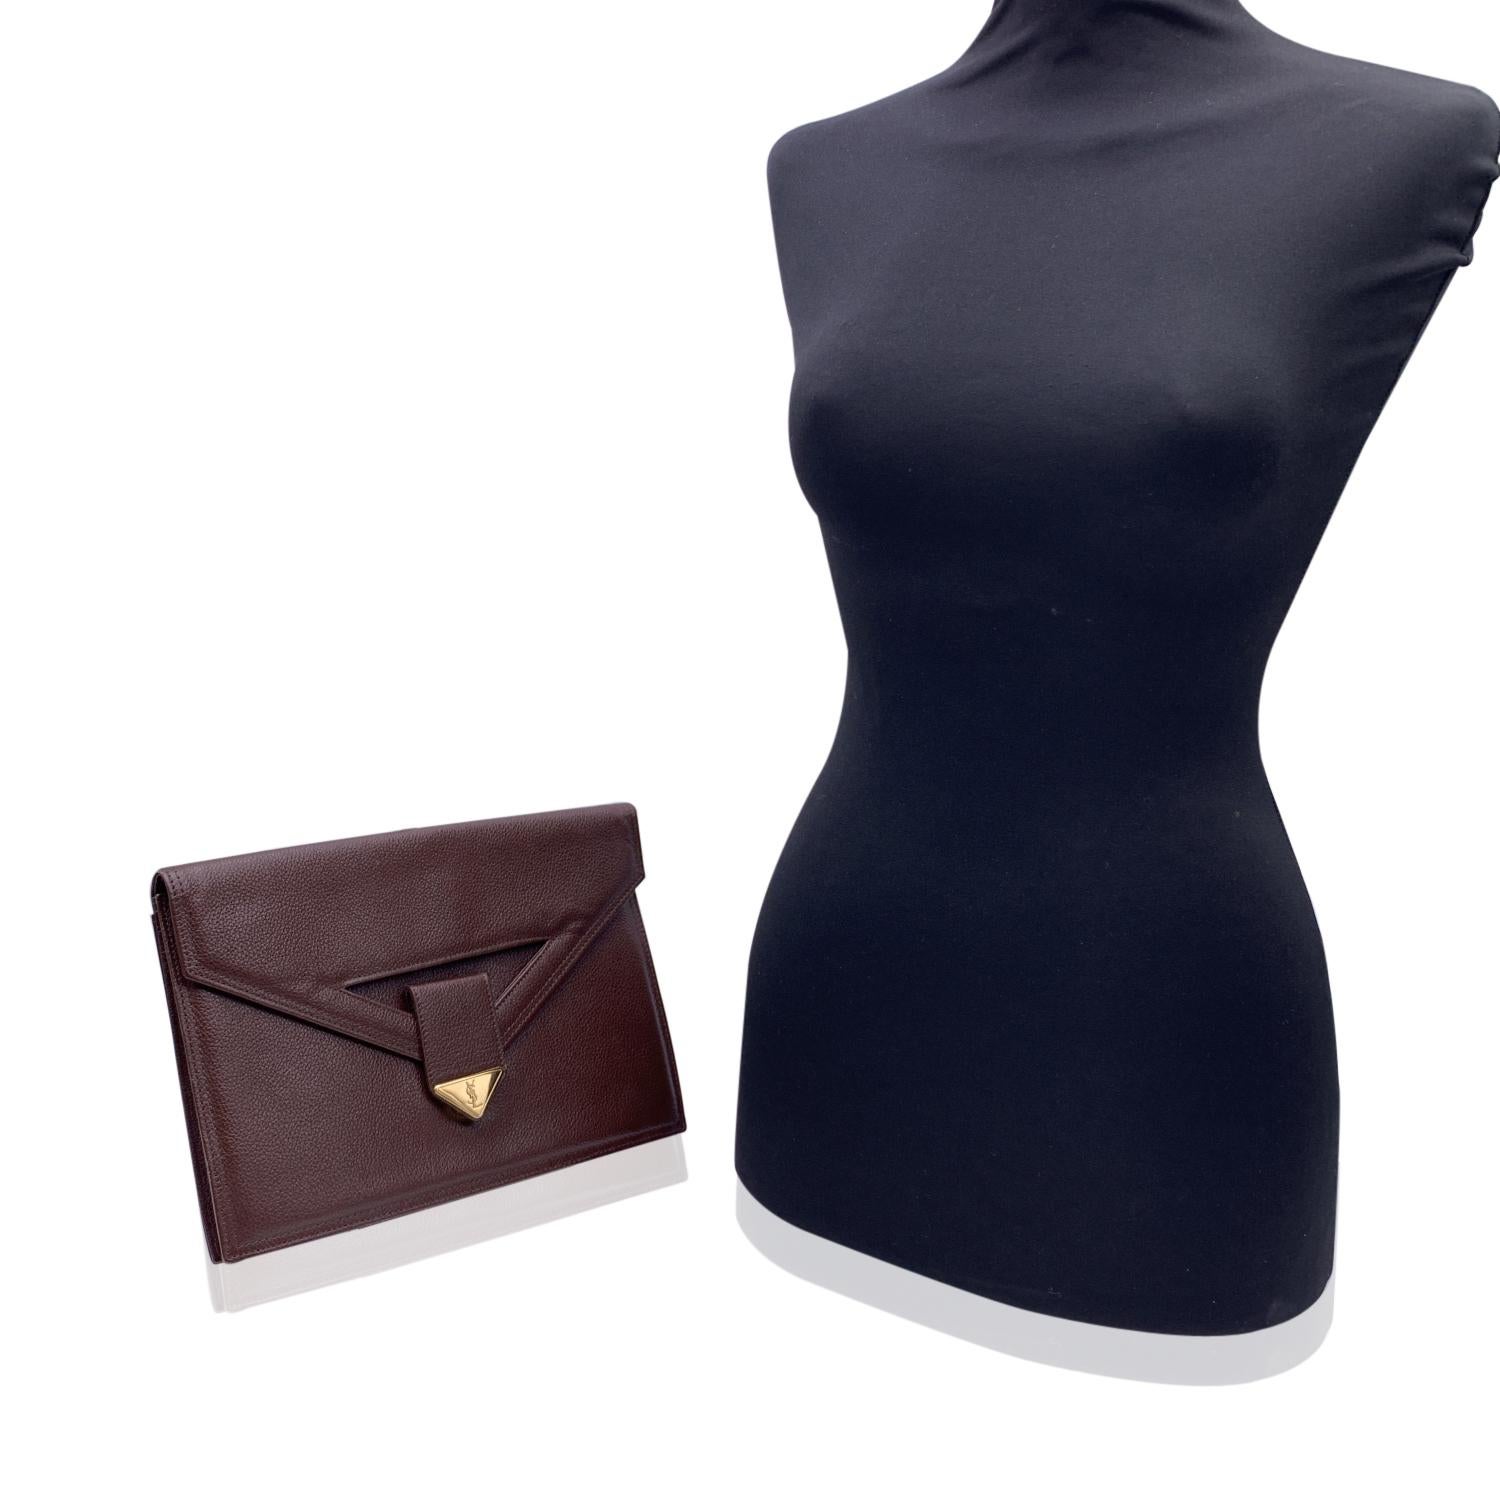 Yves Saint Laurent vintage clutch bag, crafted in brown eather. It features a flap with magnetic button closure on the front. Gold metal YSL logo tab on the front. 1 rear open pocket. Brown fabric lining. 1 side zip pocket inside. 'YVES SAINT